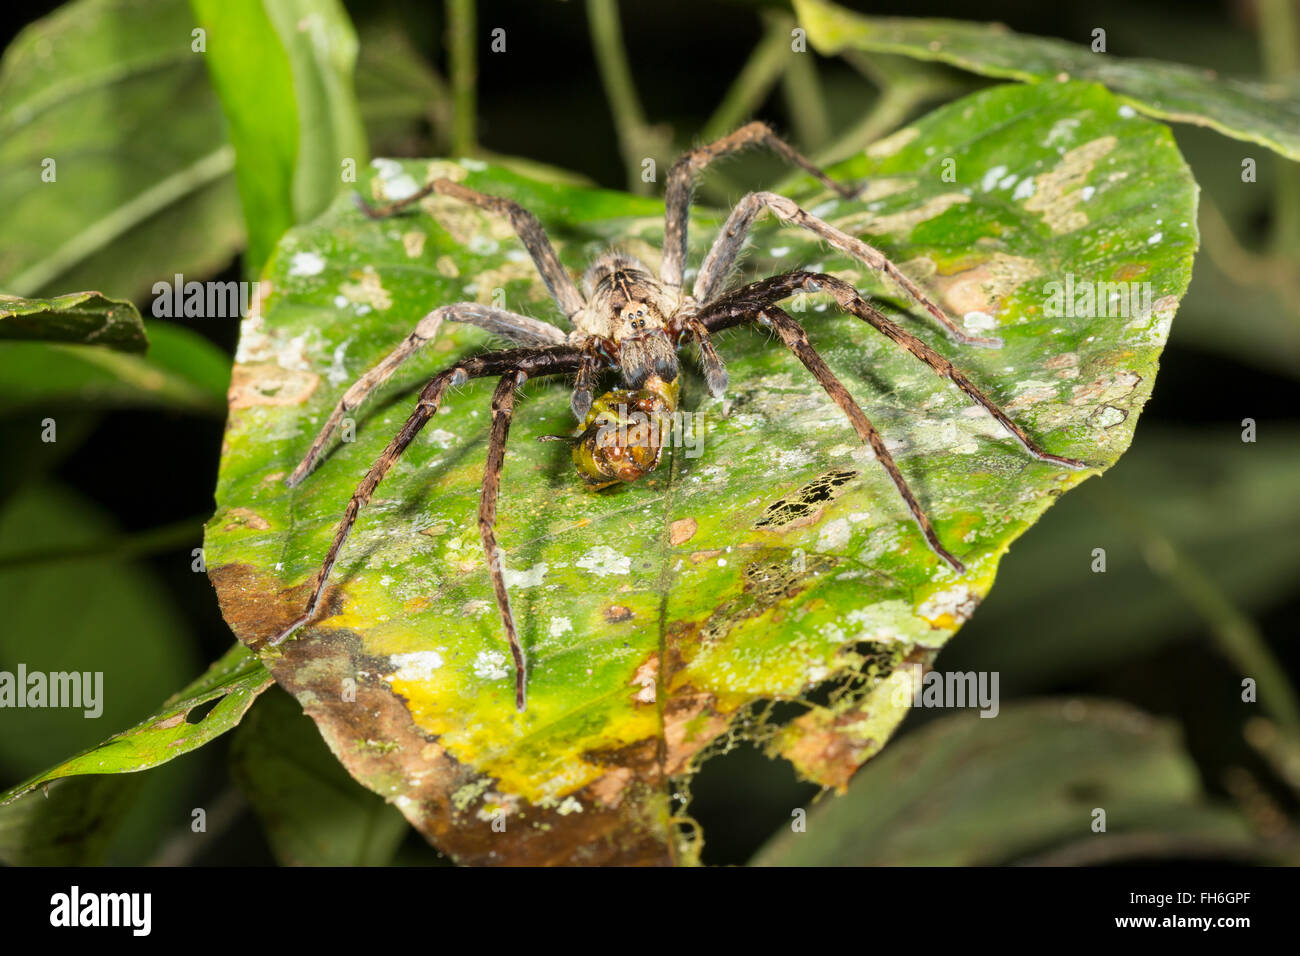 Large wandering spider (family Ctenidae) feeding on a grasshopper in the rainforest at night, Pastaza province, Ecuador Stock Photo